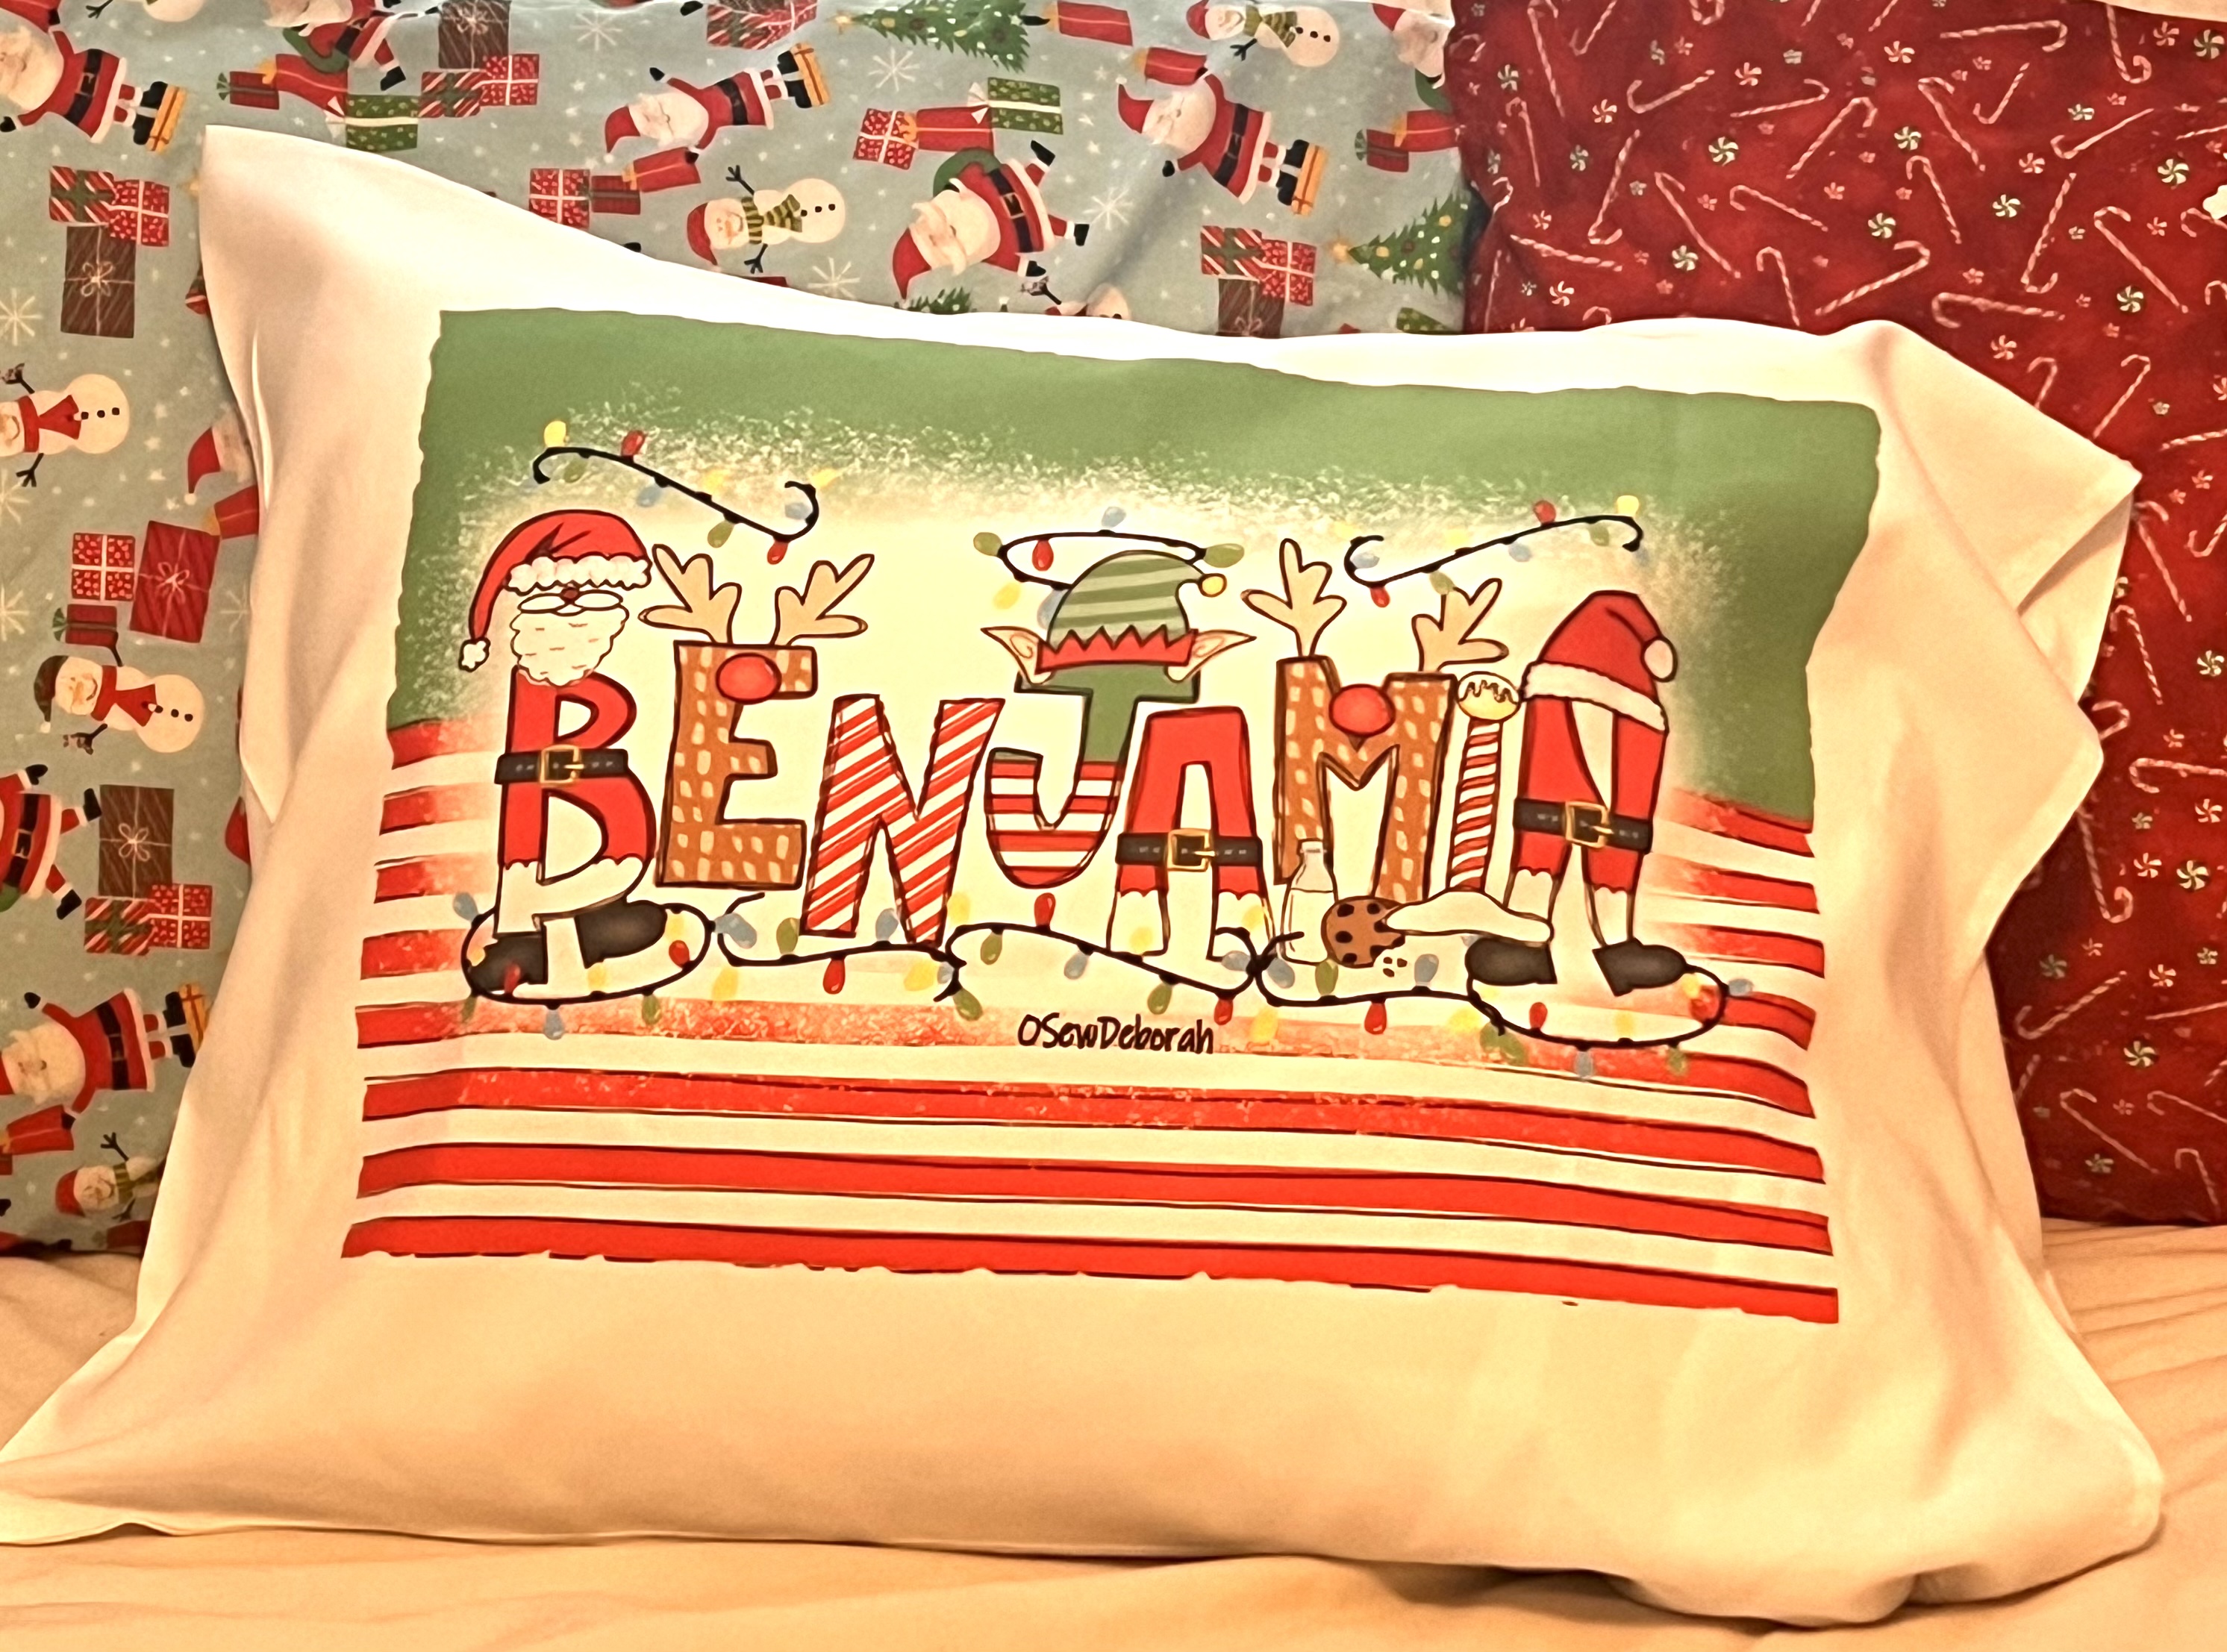 Personalized Pillowcase
Perfect Tradition to cherish each year
Printed in 13x19 on SG1000